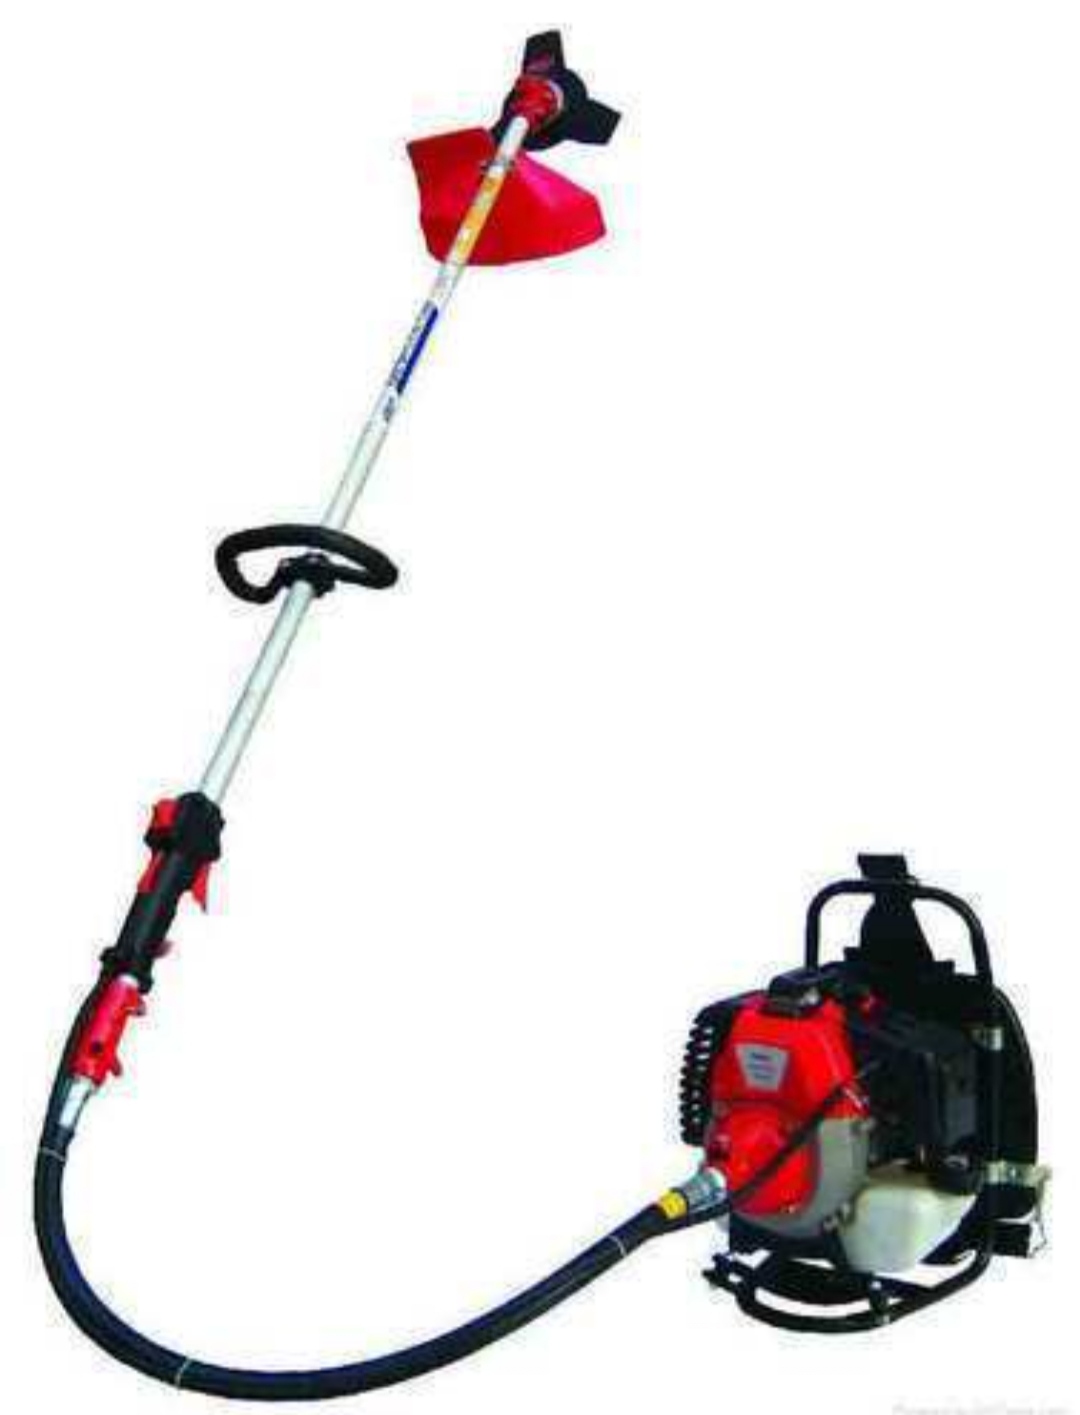 Back pack brush cutter and paddy cutter